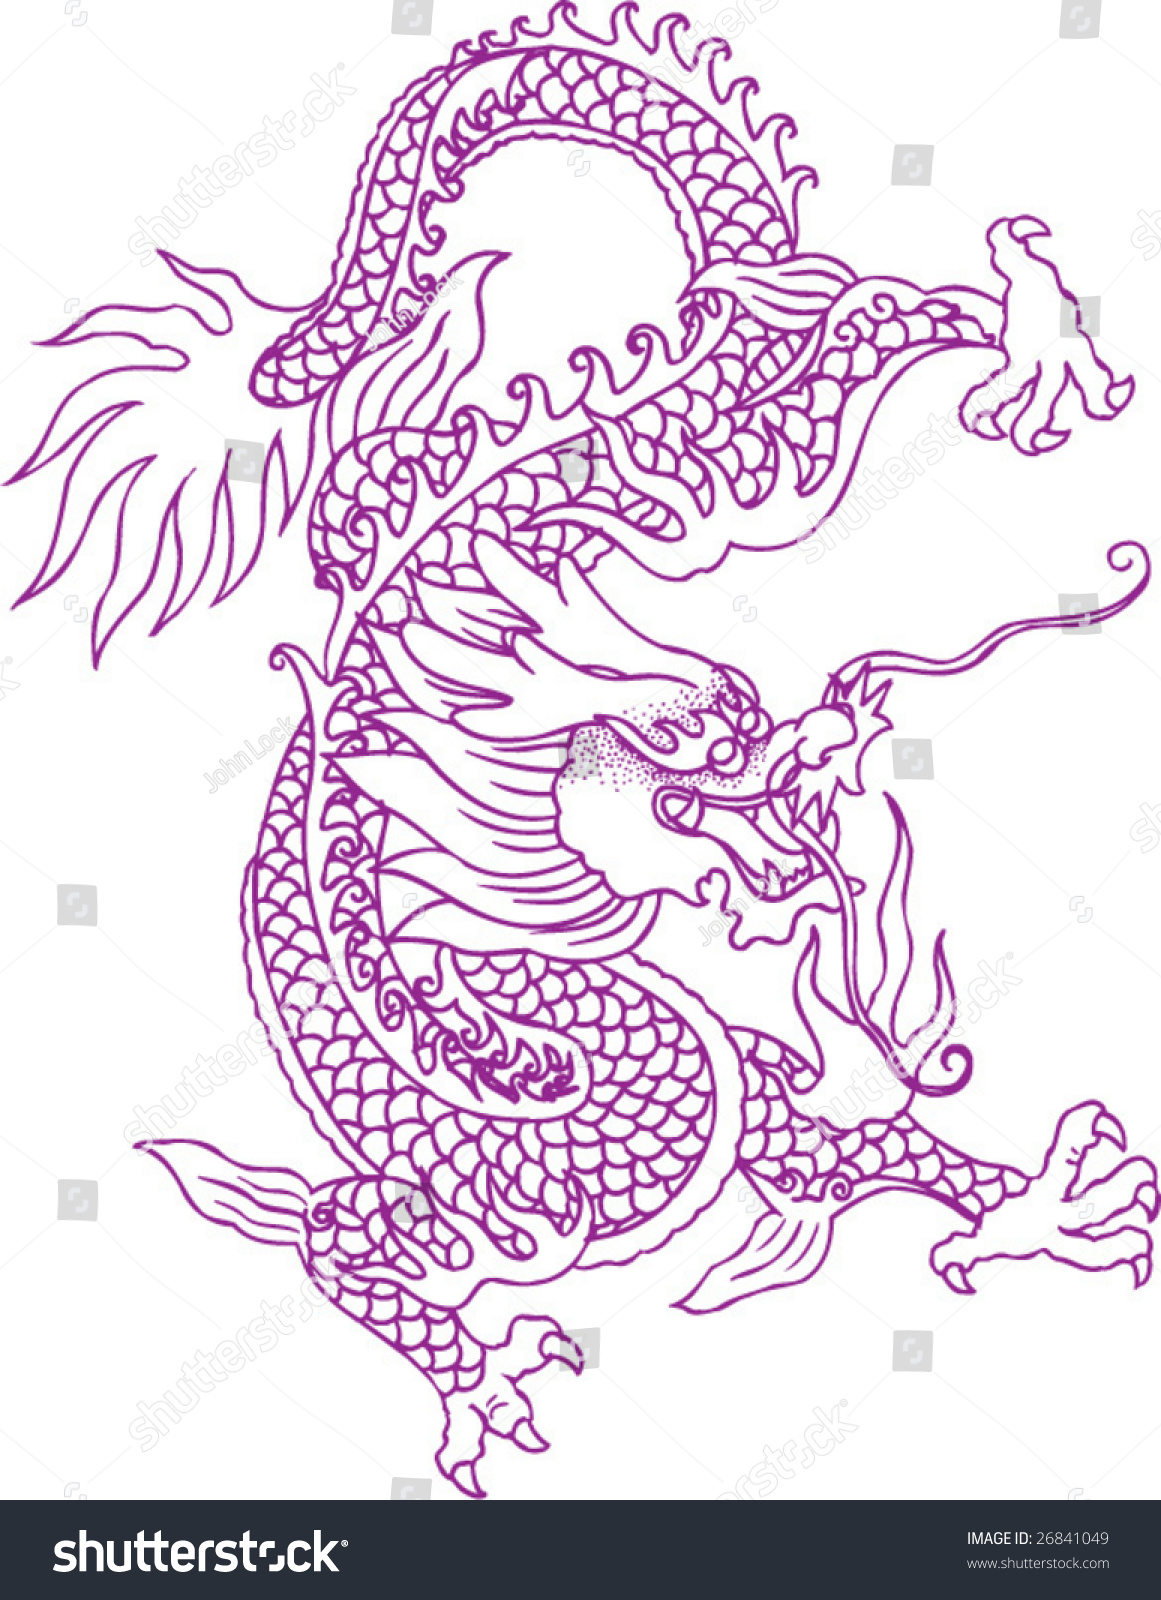 Vector Ancient Chinese Dragon Pattern Stock Vector 26841049 - Shutterstock